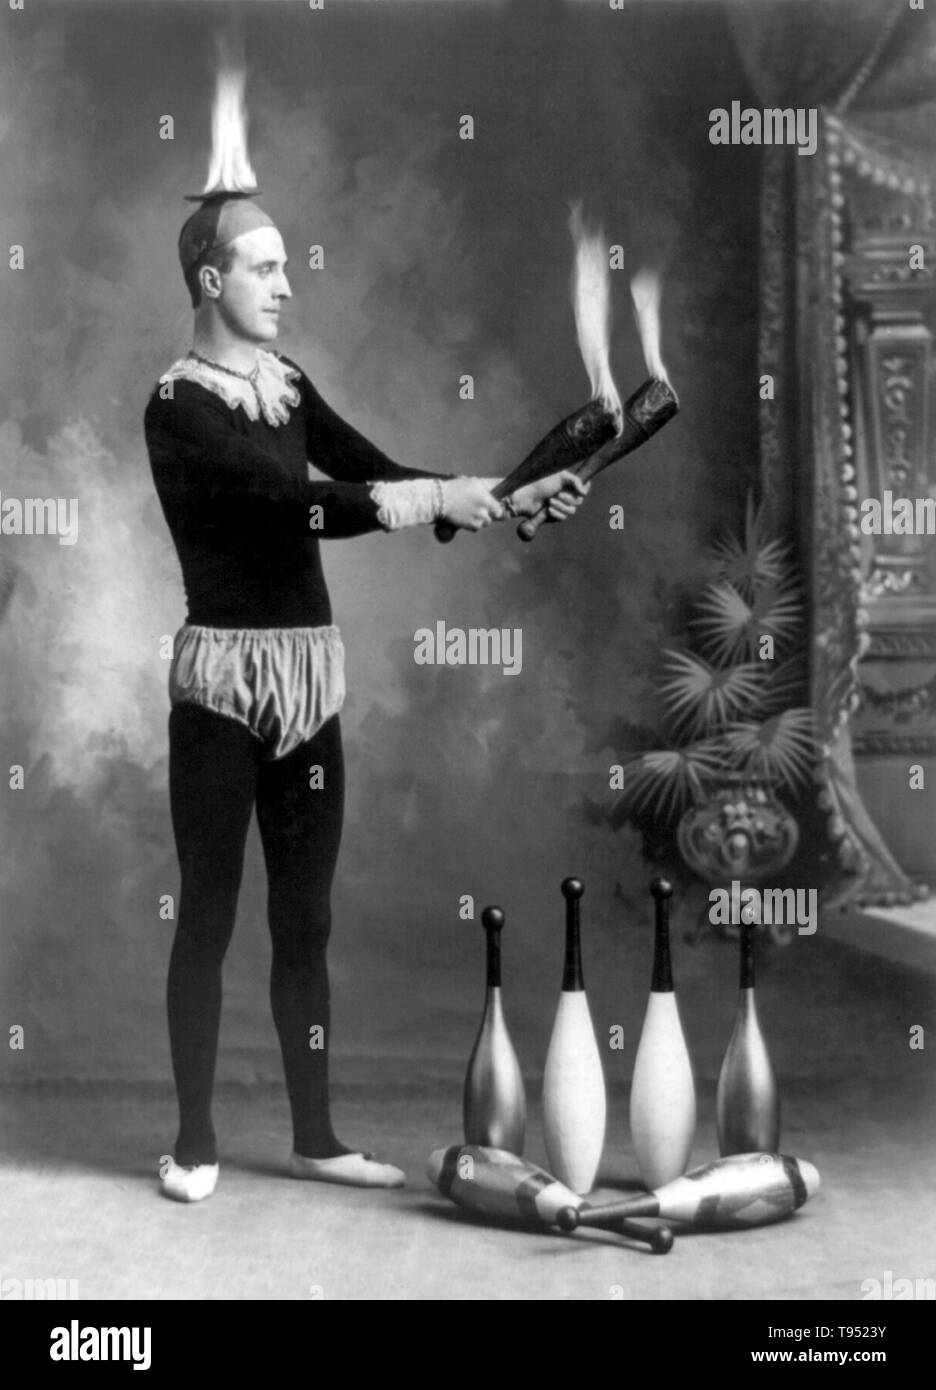 Entitled: 'J.T. Doyle holding 2 burning juggling clubs'. Juggling is a physical skill, performed by a juggler, involving the manipulation of objects for recreation, entertainment, art or sport. The most recognizable form of juggling is toss juggling. Juggling can be the manipulation of one object or many objects at the same time, using one or many hands. Jugglers often refer to the objects they juggle as props. The most common props are balls, clubs, or rings. Some jugglers use more dramatic objects such as knives, fire torches or chainsaws. Photographed by J.E. Pasonault, 1902. Stock Photo